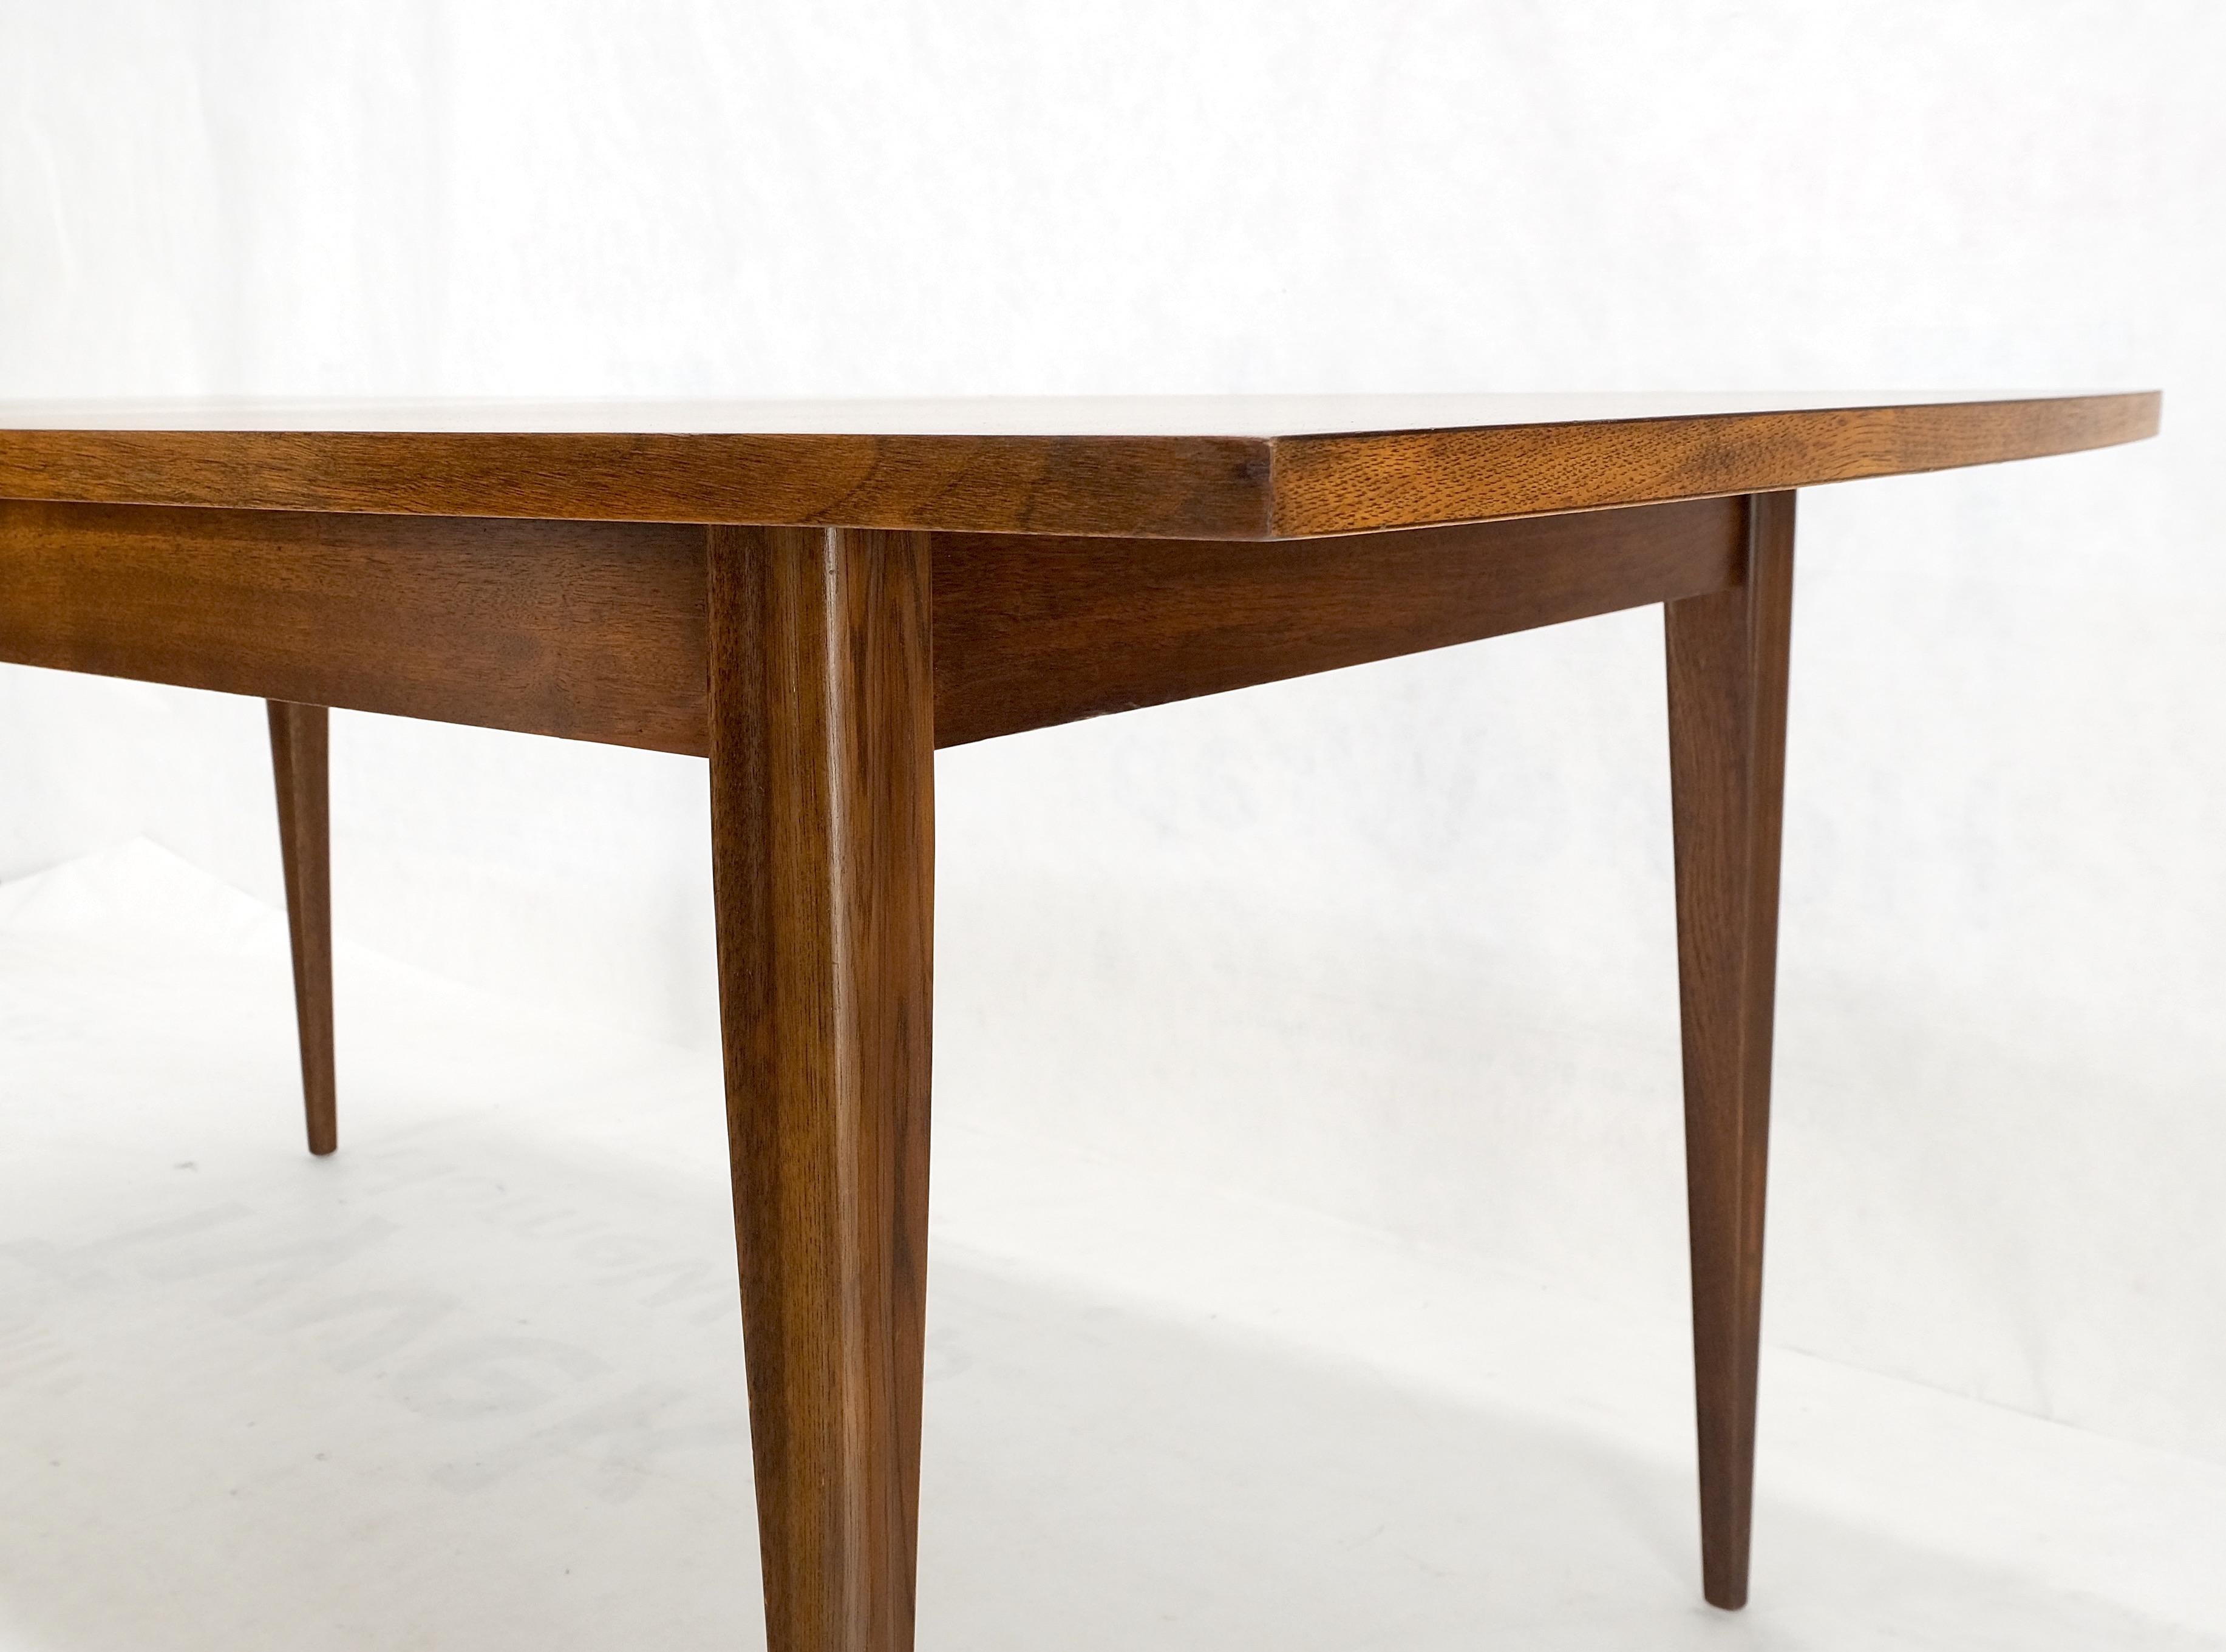 Lacquered Danish American Mid-Century Modern Walnut Boat Shape Dining Table 1 Leaf Mint For Sale